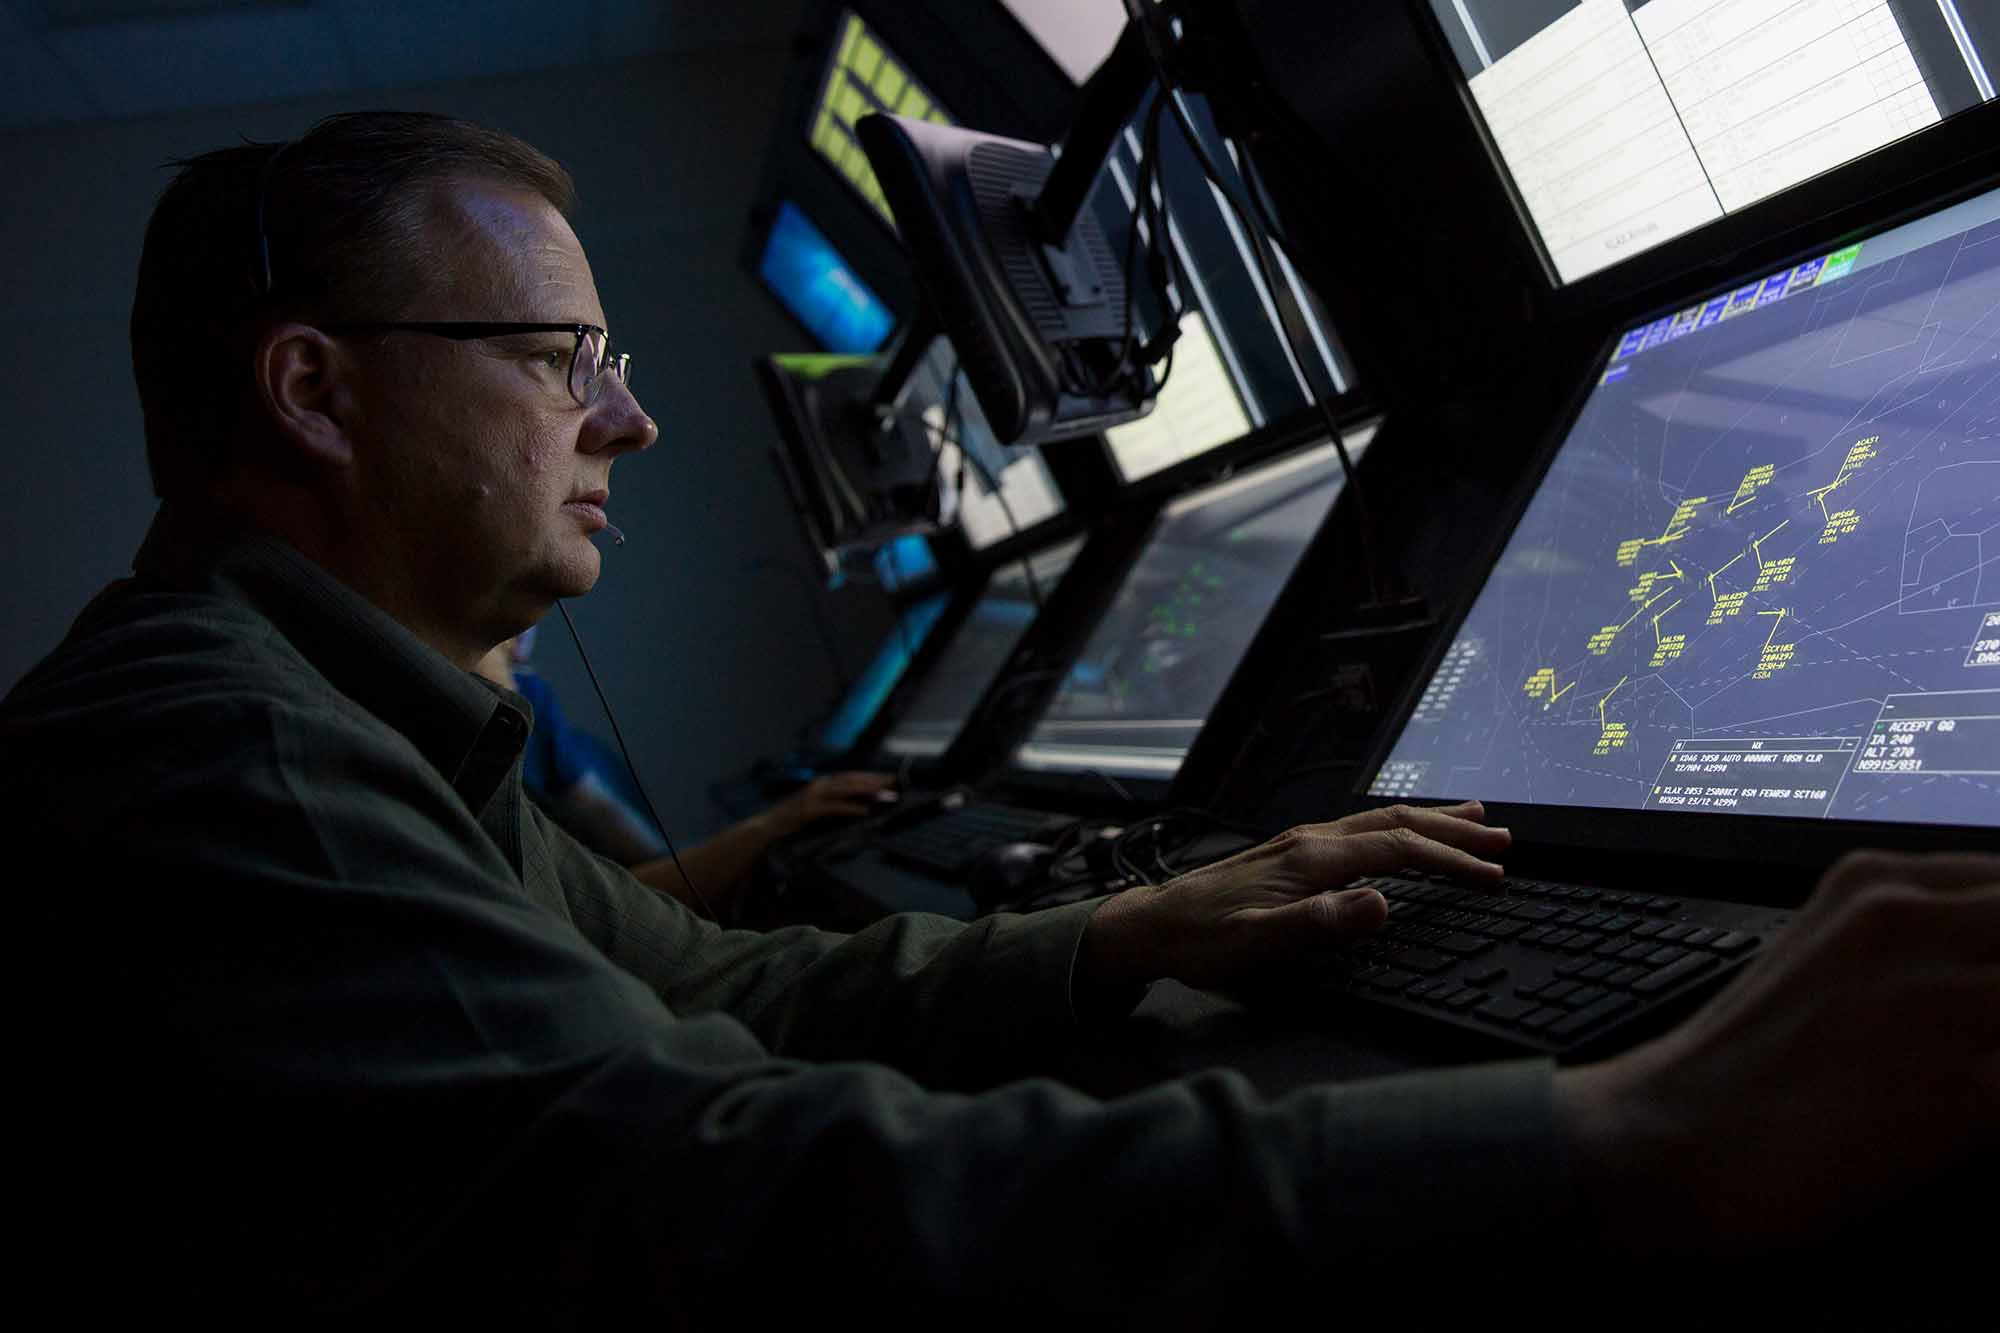 A man works at a station in a large array of computers and monitors used for air traffic control simulation.